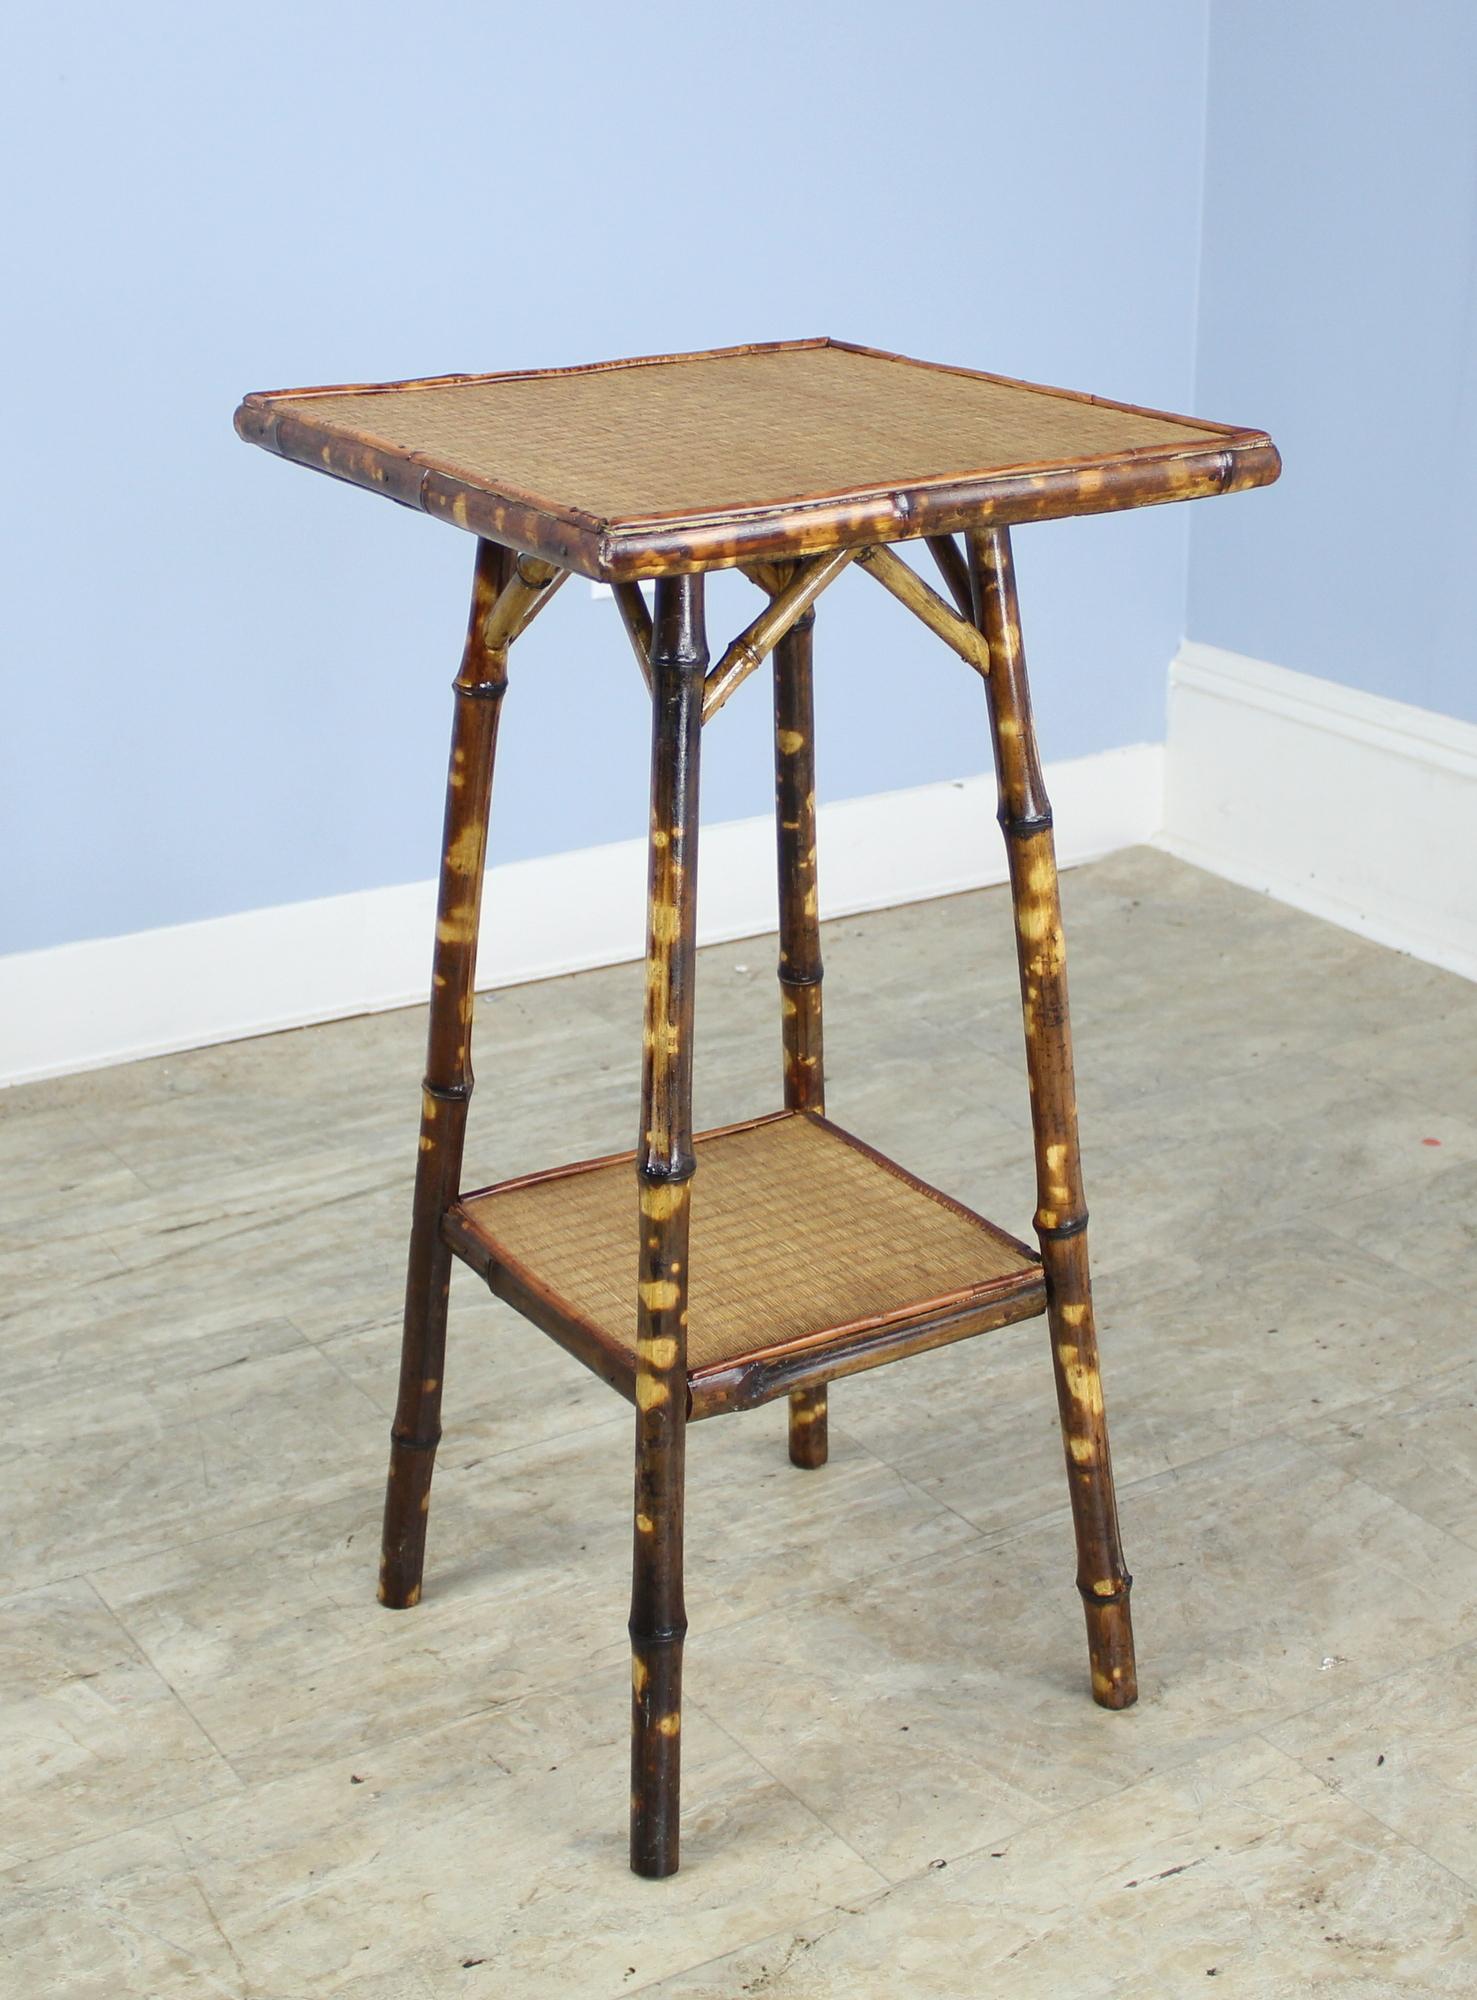 A small bamboo side table with top and bottom shelf of tightly woven rattan in fabulous antique condition. The painted legs still retain their vibrancy. Measurements below are for the entire table. The top measures: 14 inches by 14 inches. Sweet!